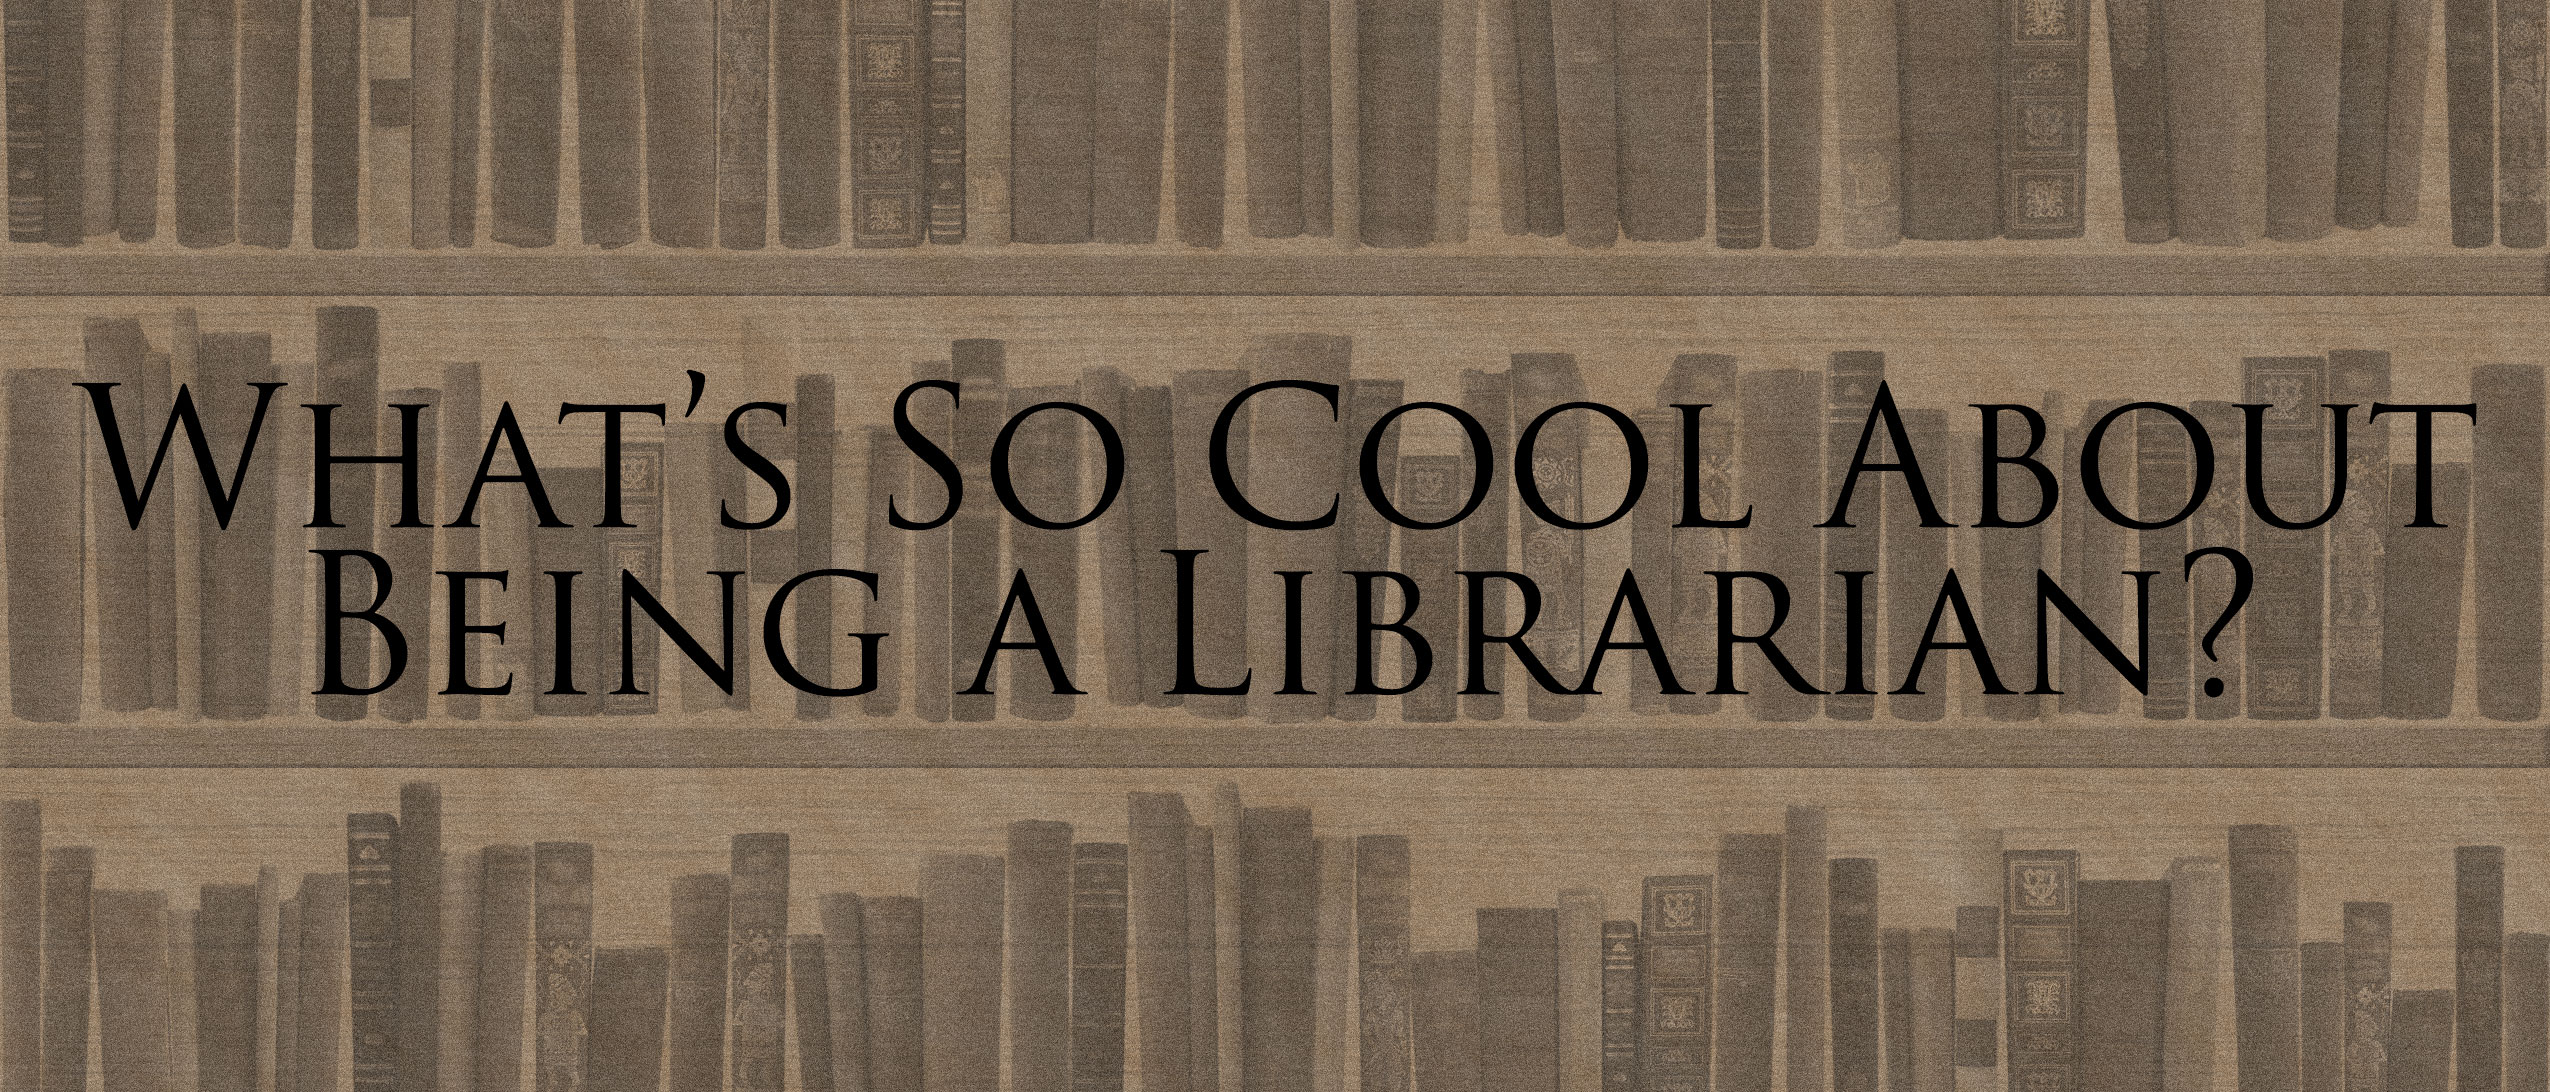 What's So Cool About Being a Librarian?